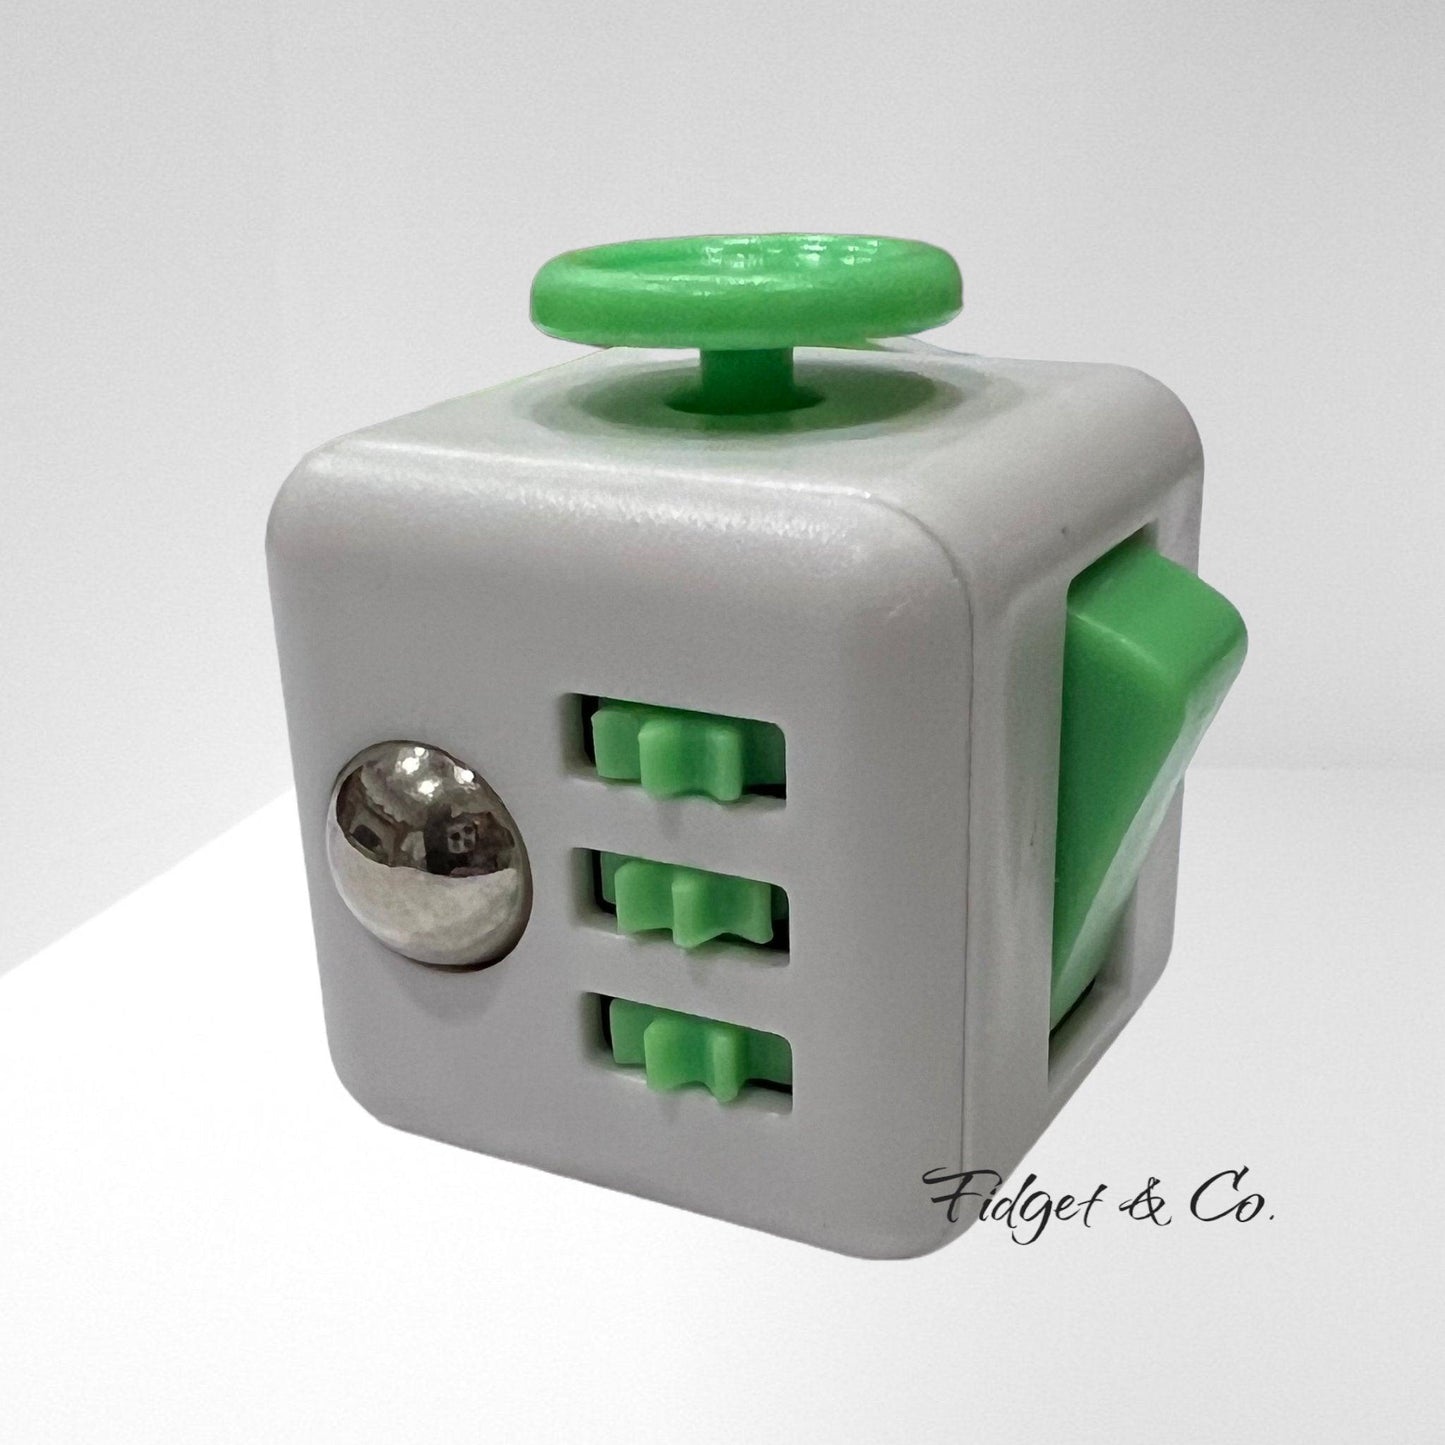 6 Sided Fidget Cube with Protective Display/Case - Fidget & Co.